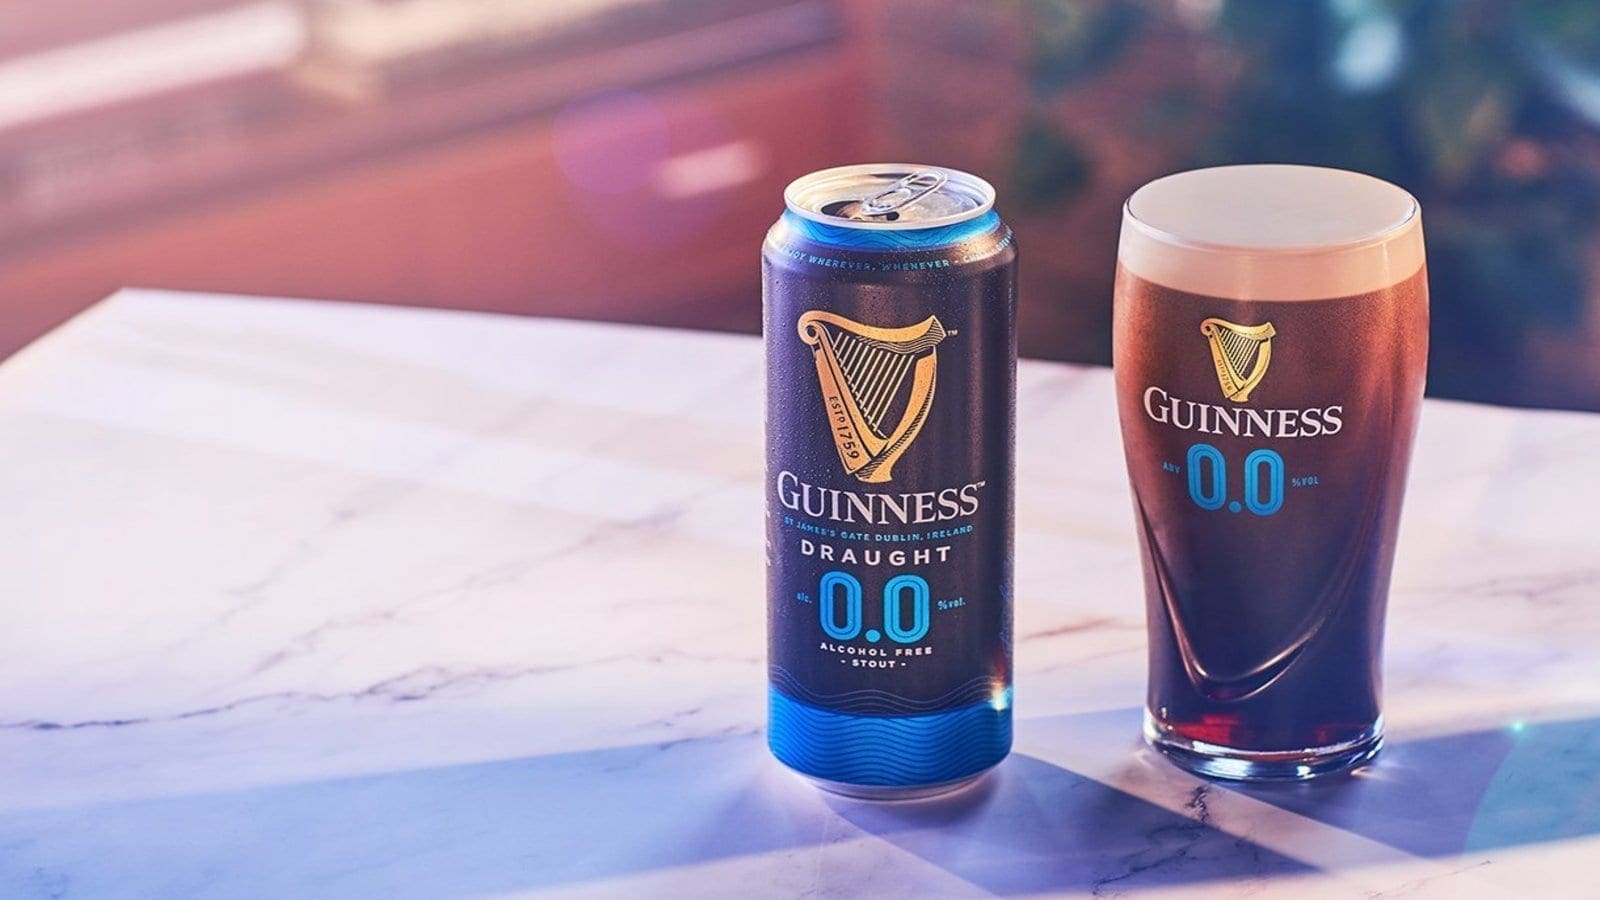 Diageo launches new alcohol-free Guinness beer that has the same natural ingredients